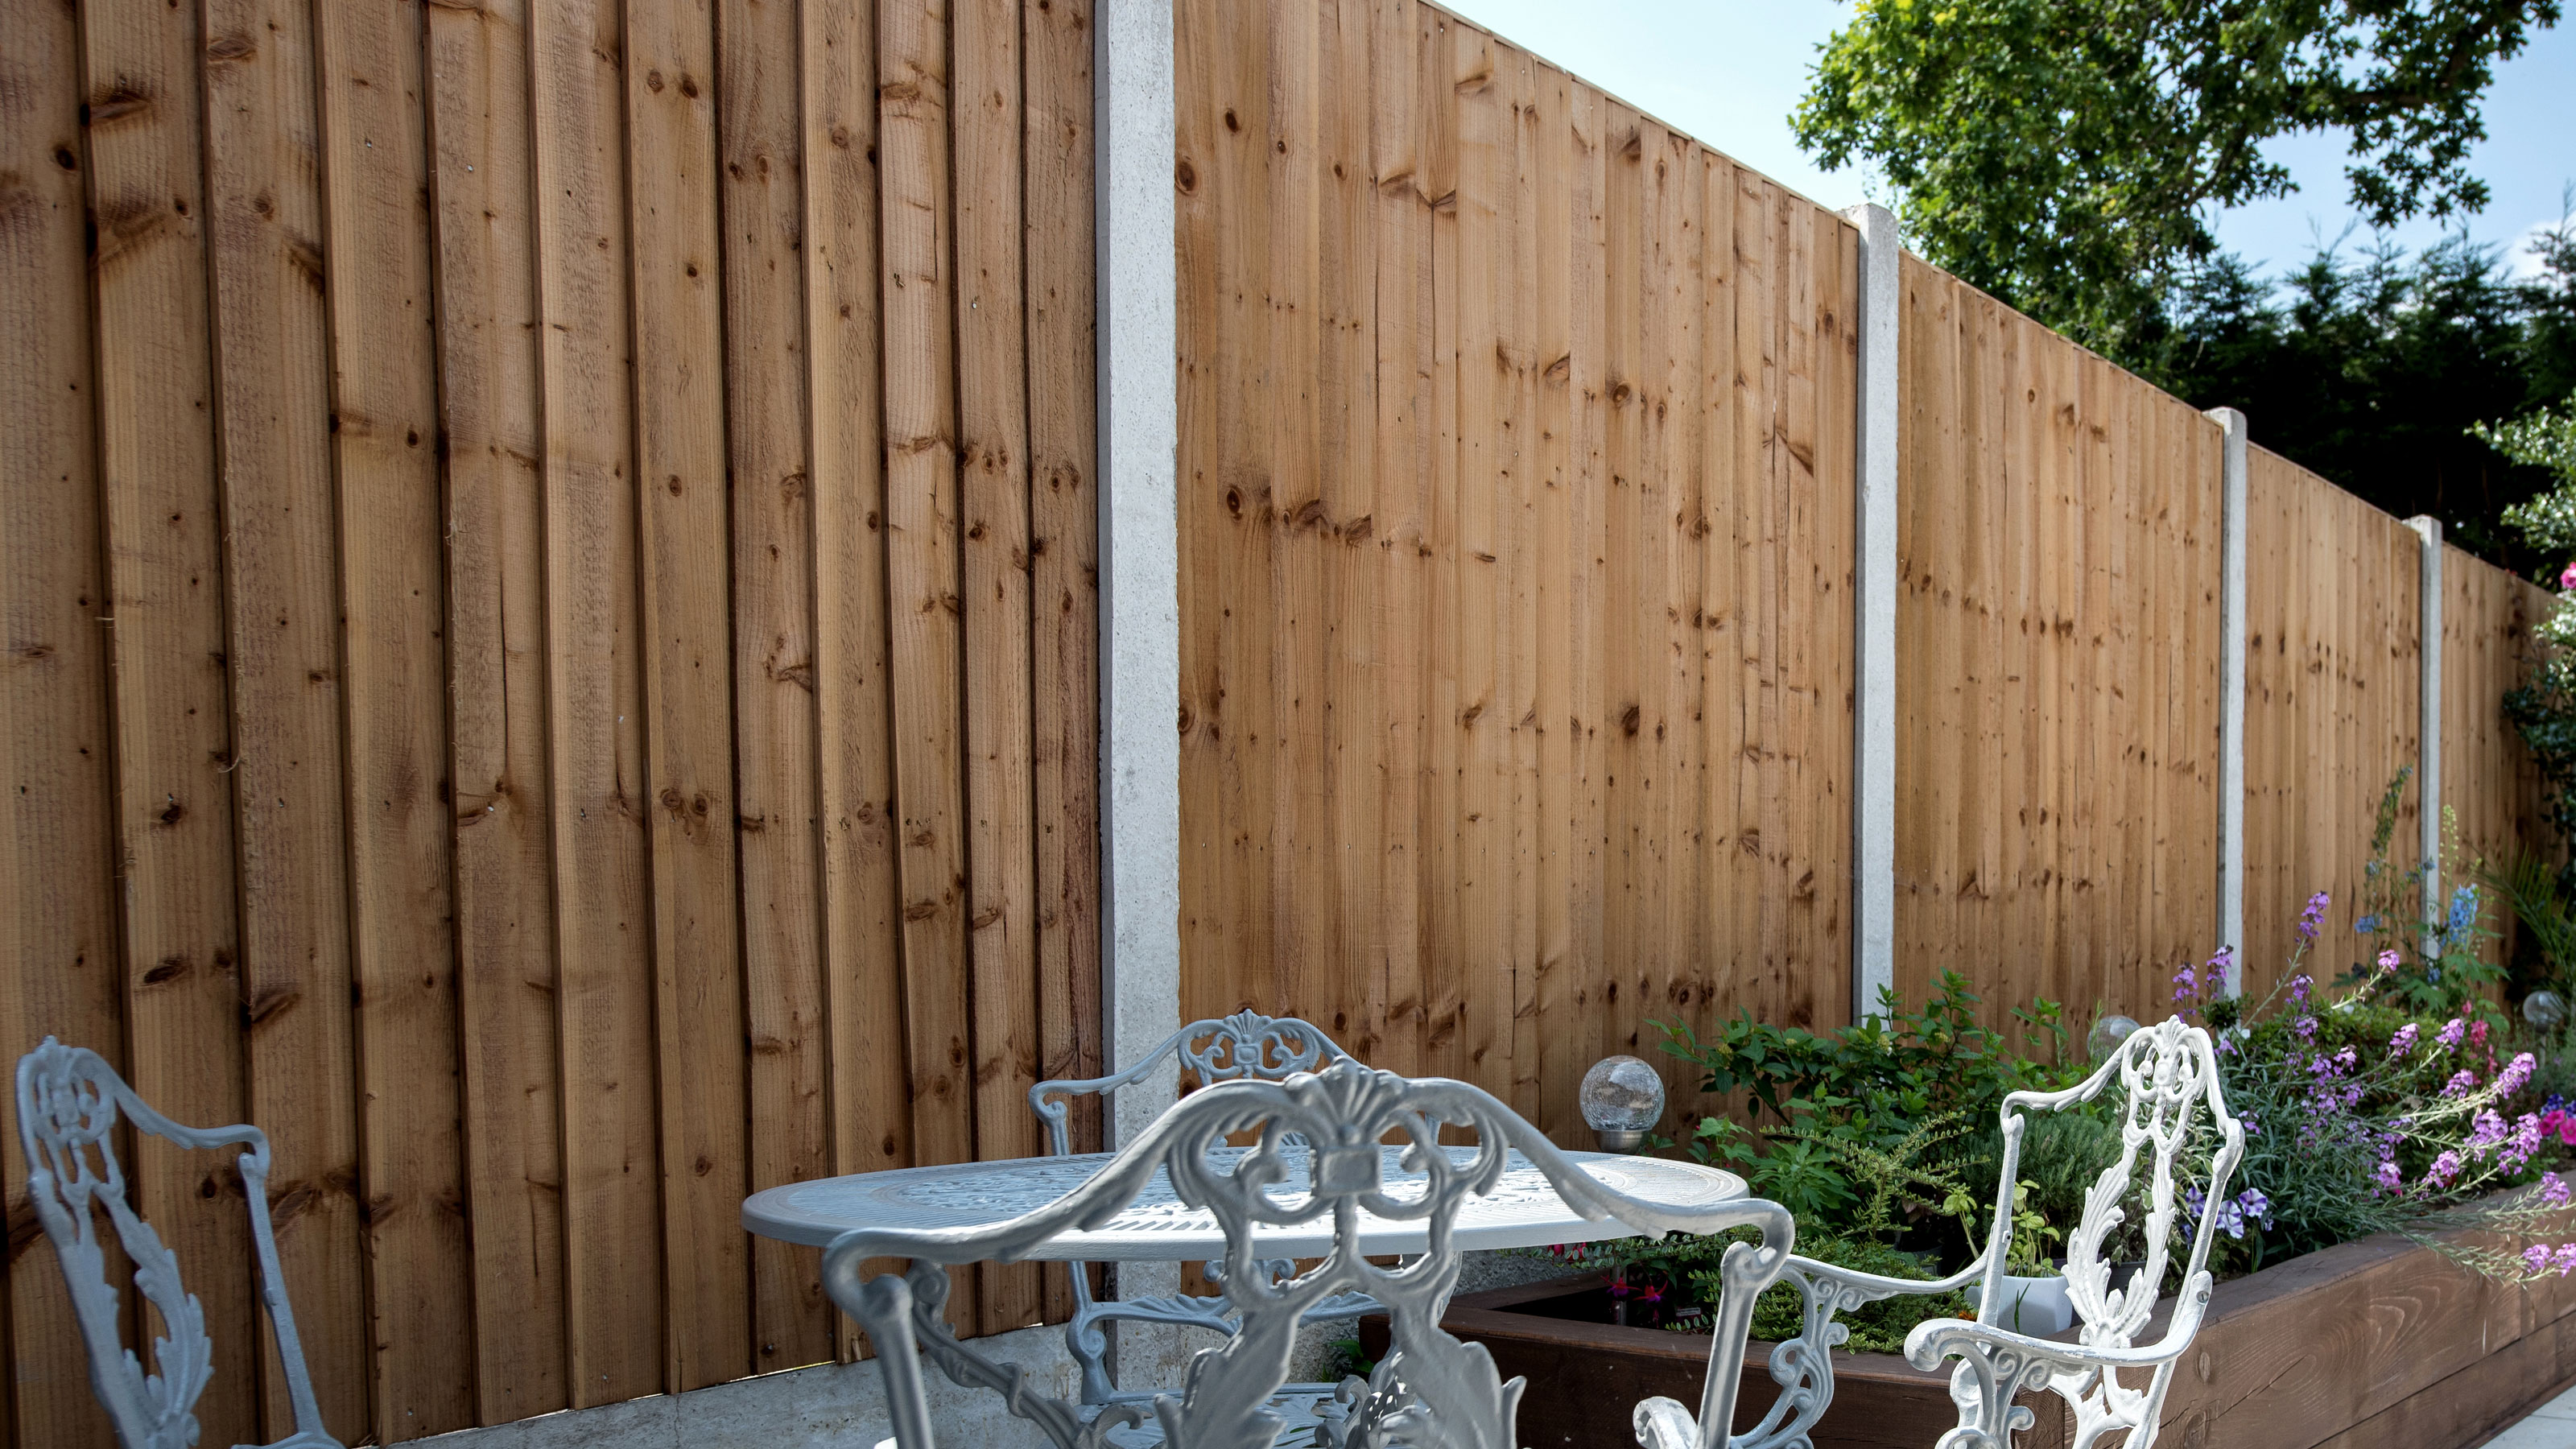 4' Tall Straight Picket Fence